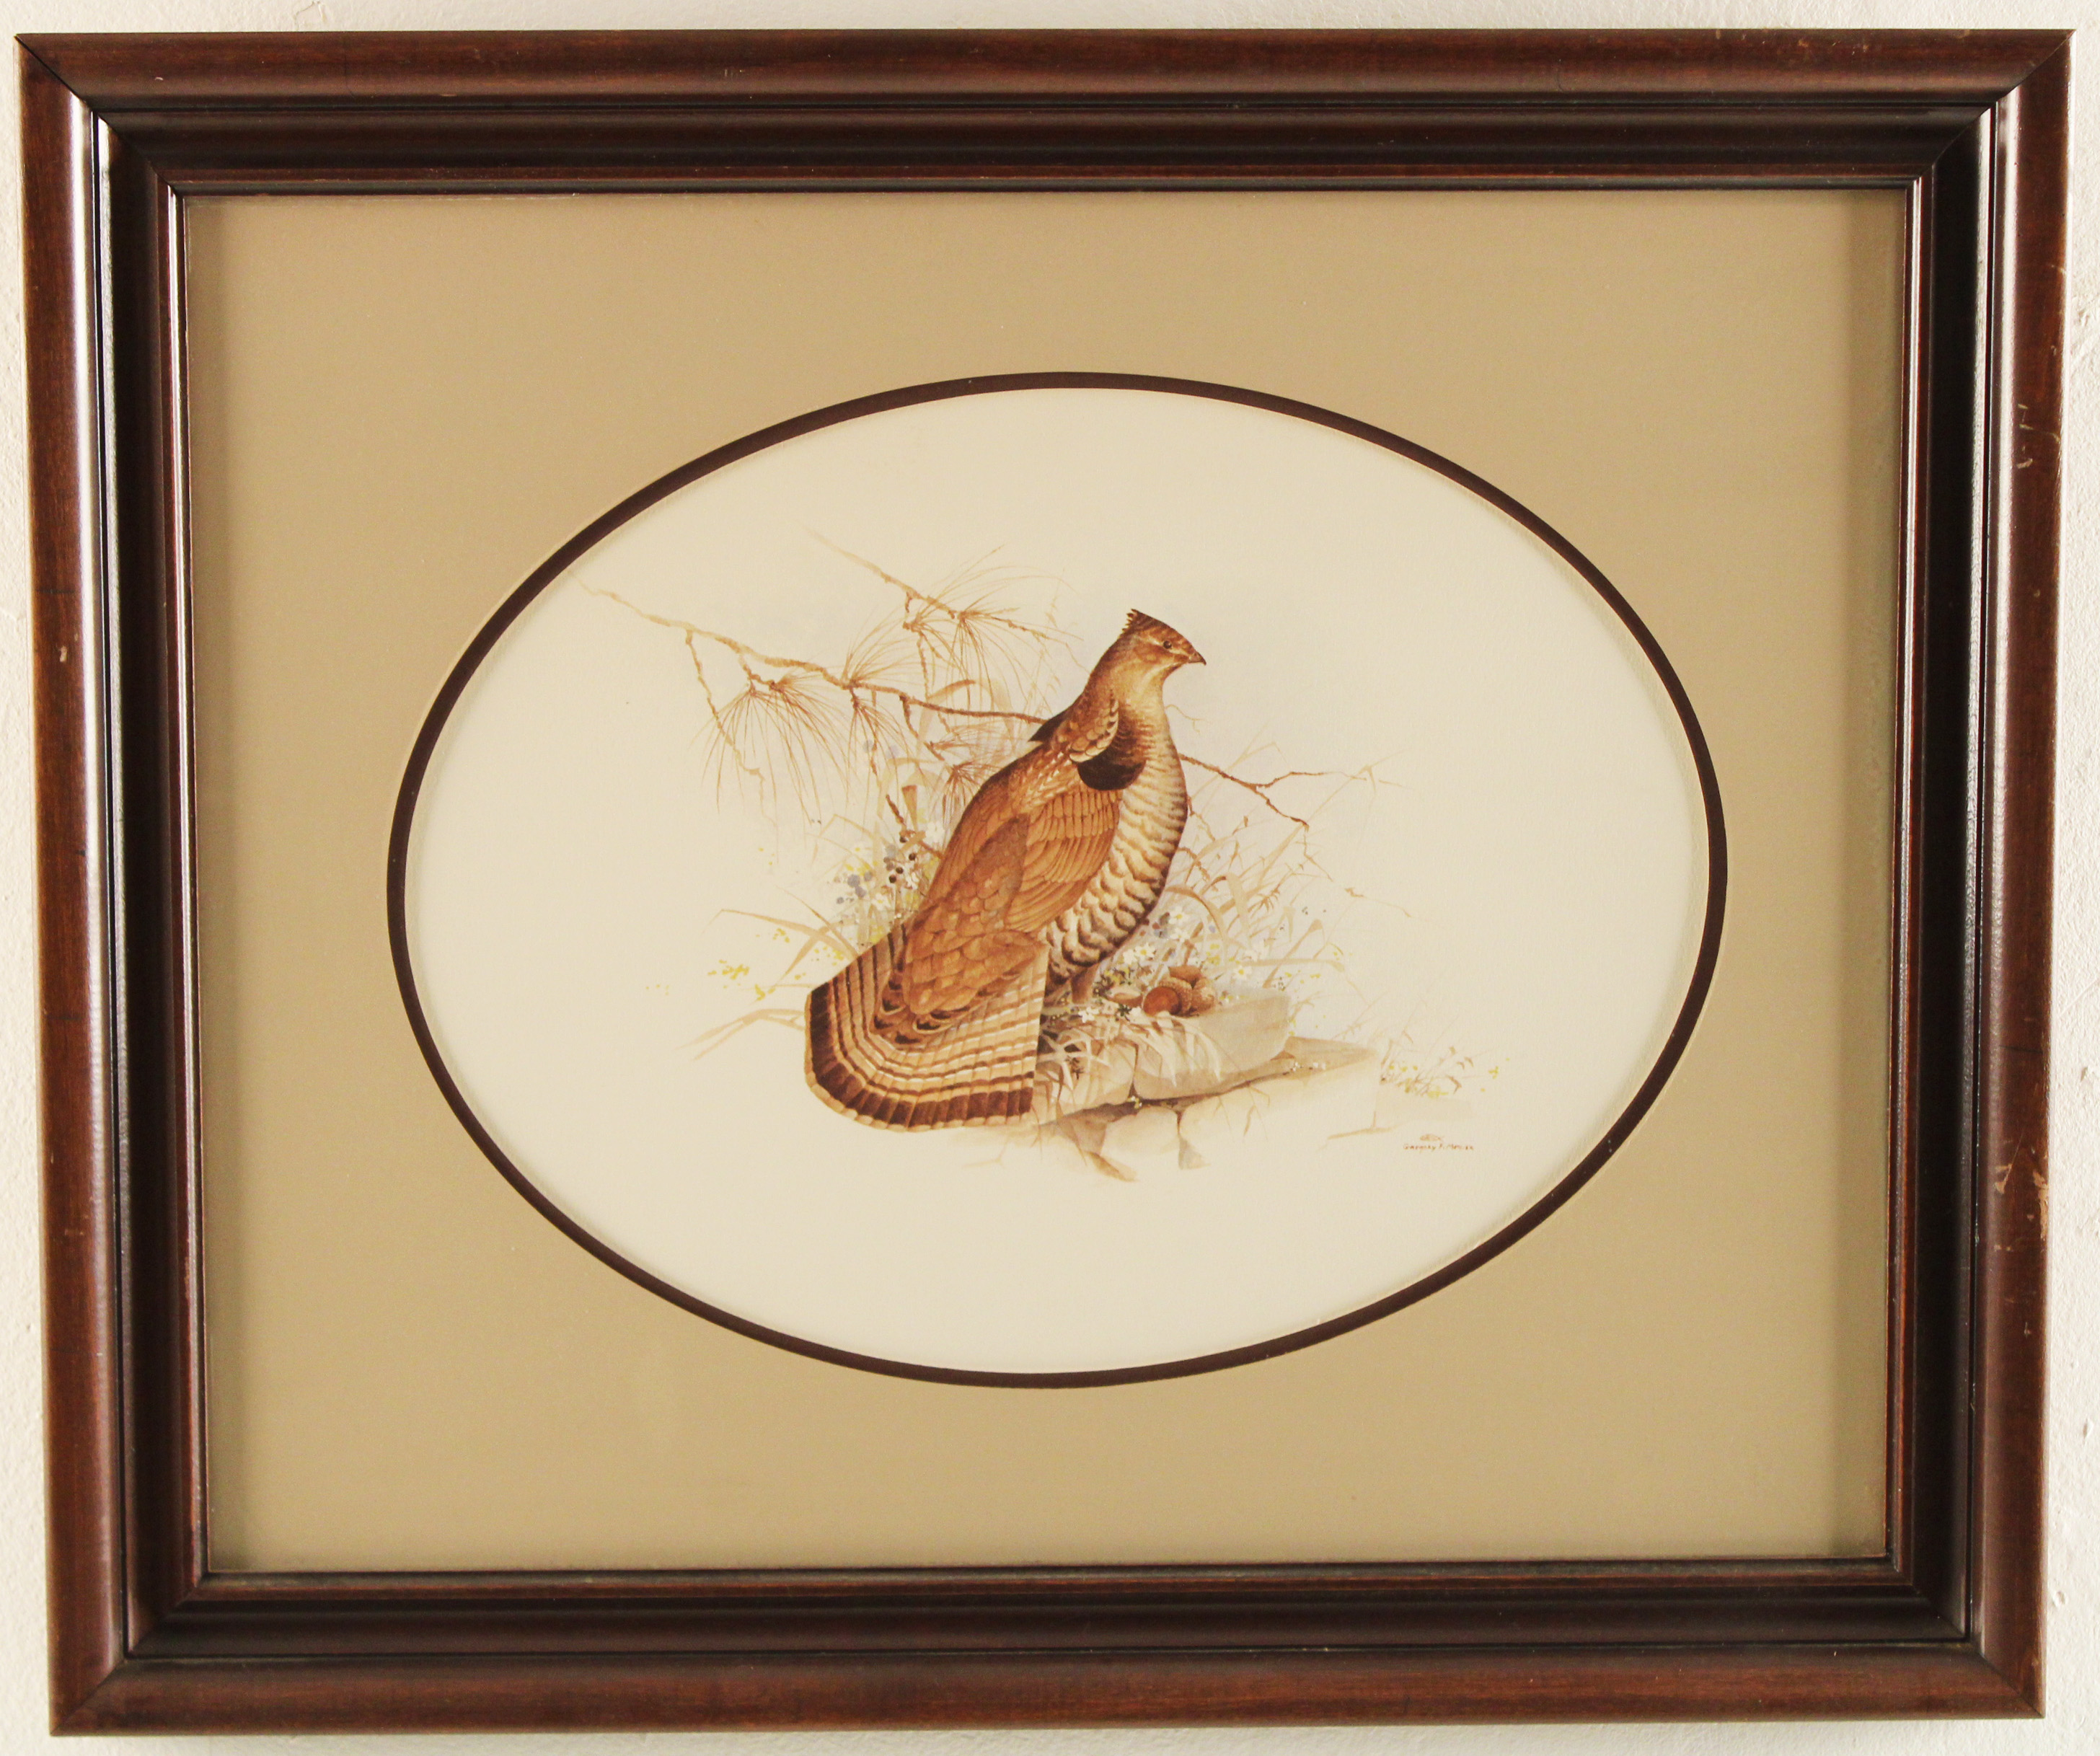 FRAMED WATERCOLOR OF A QUAIL, GREGORY